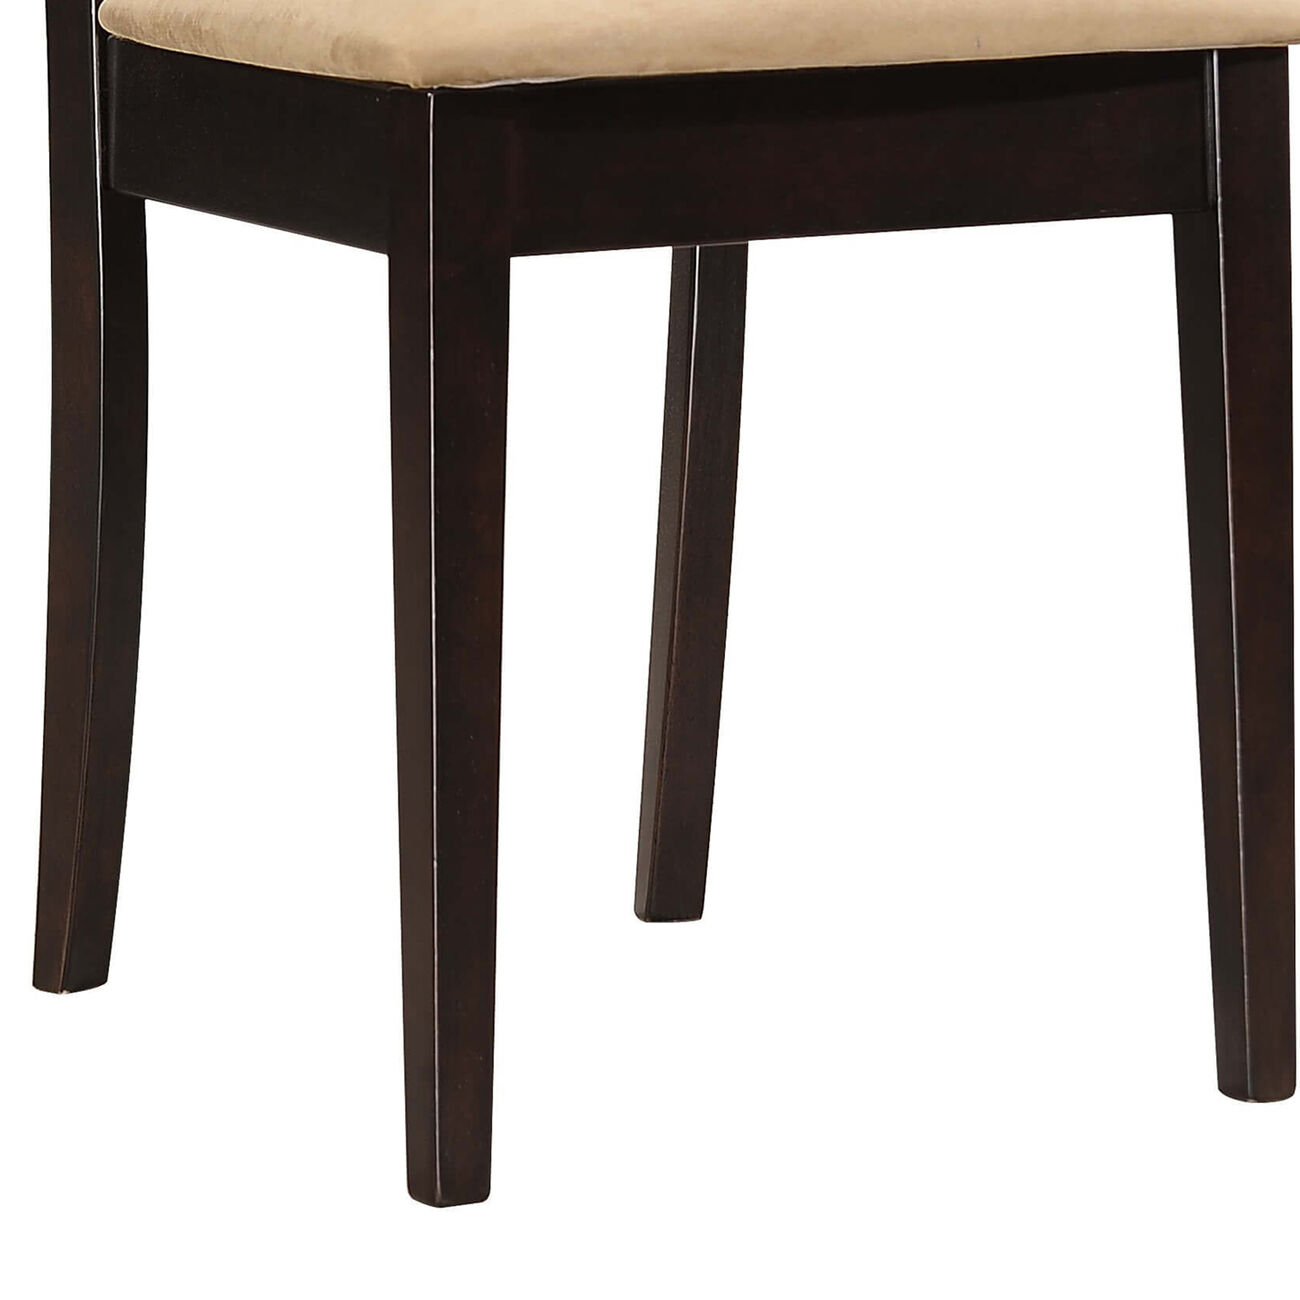 Geometric Wooden Dining Chair with Padded Seat, Set of 2, Brown and Beige